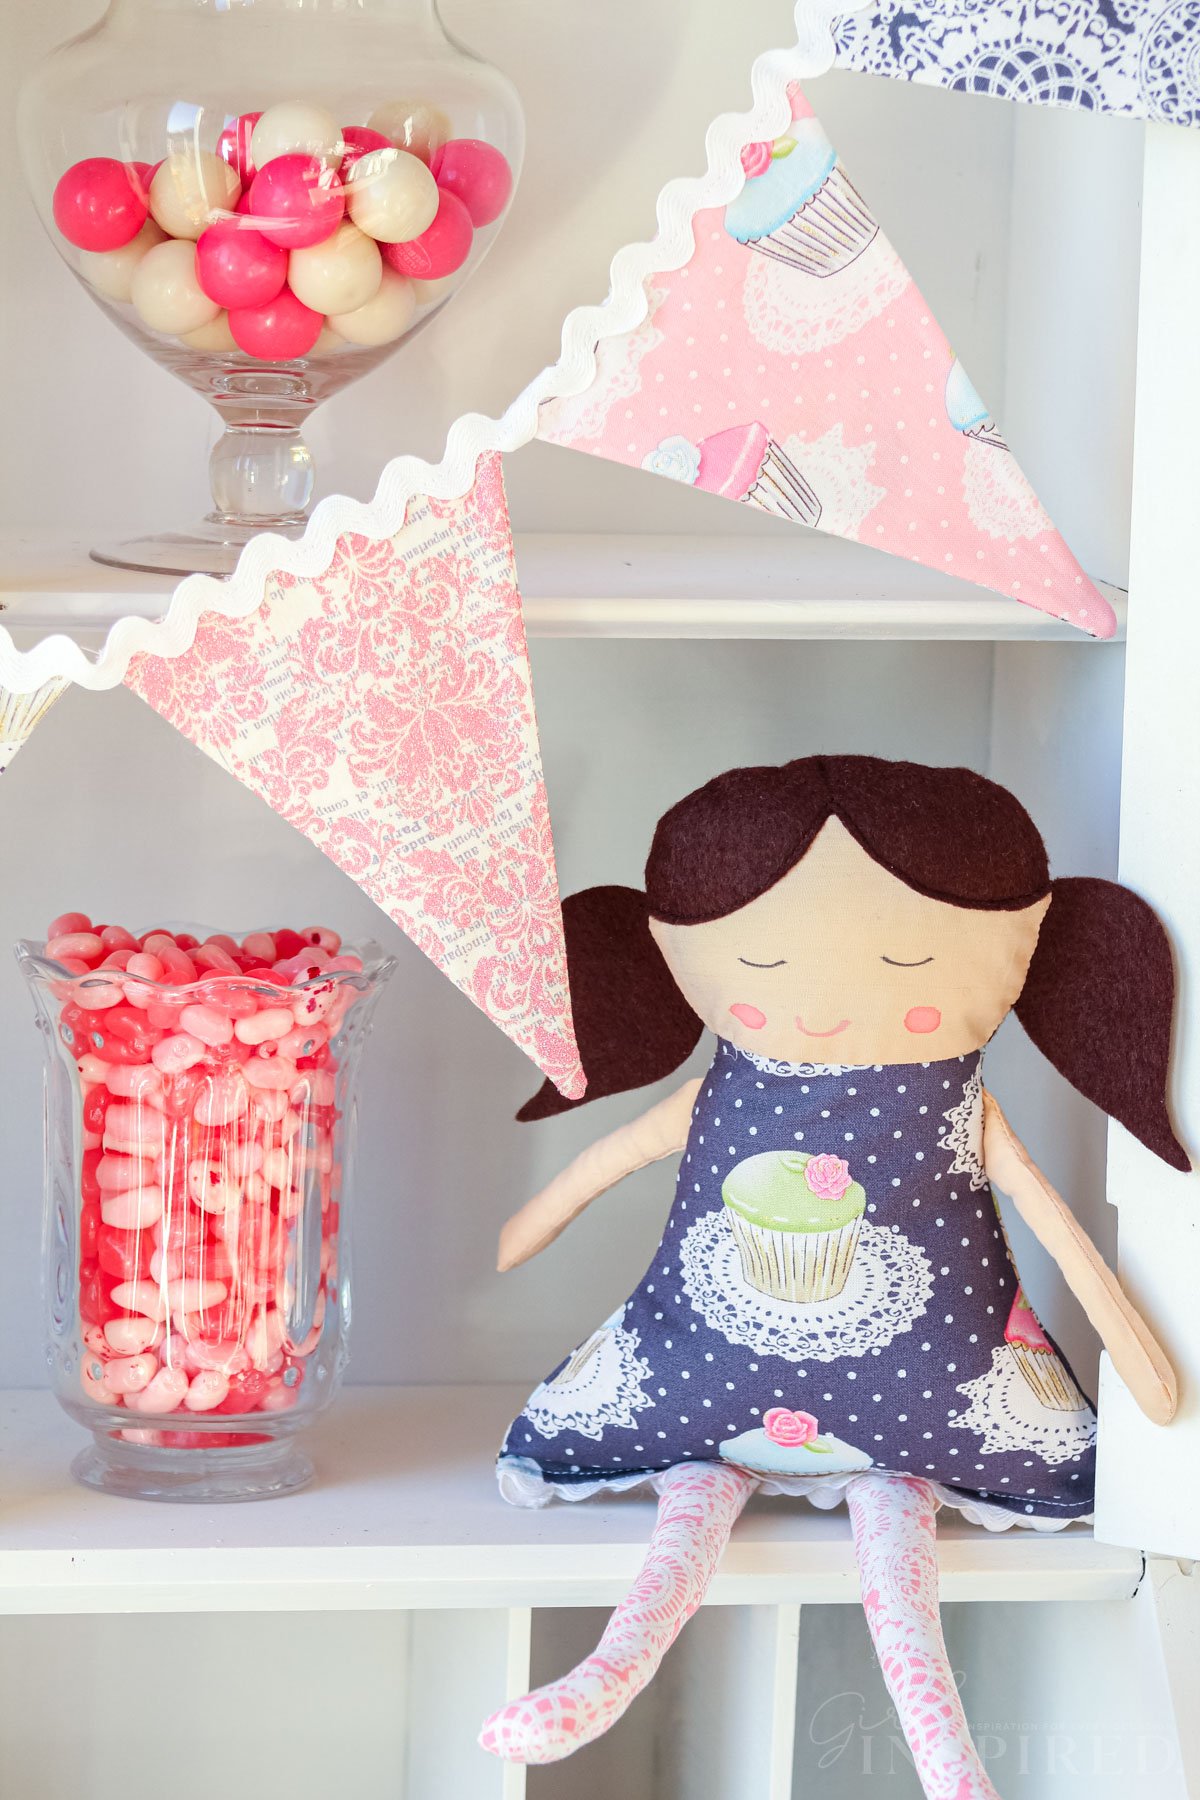 Fabric doll set on shelf next to fabric pennant banner and jar of jelly beans.